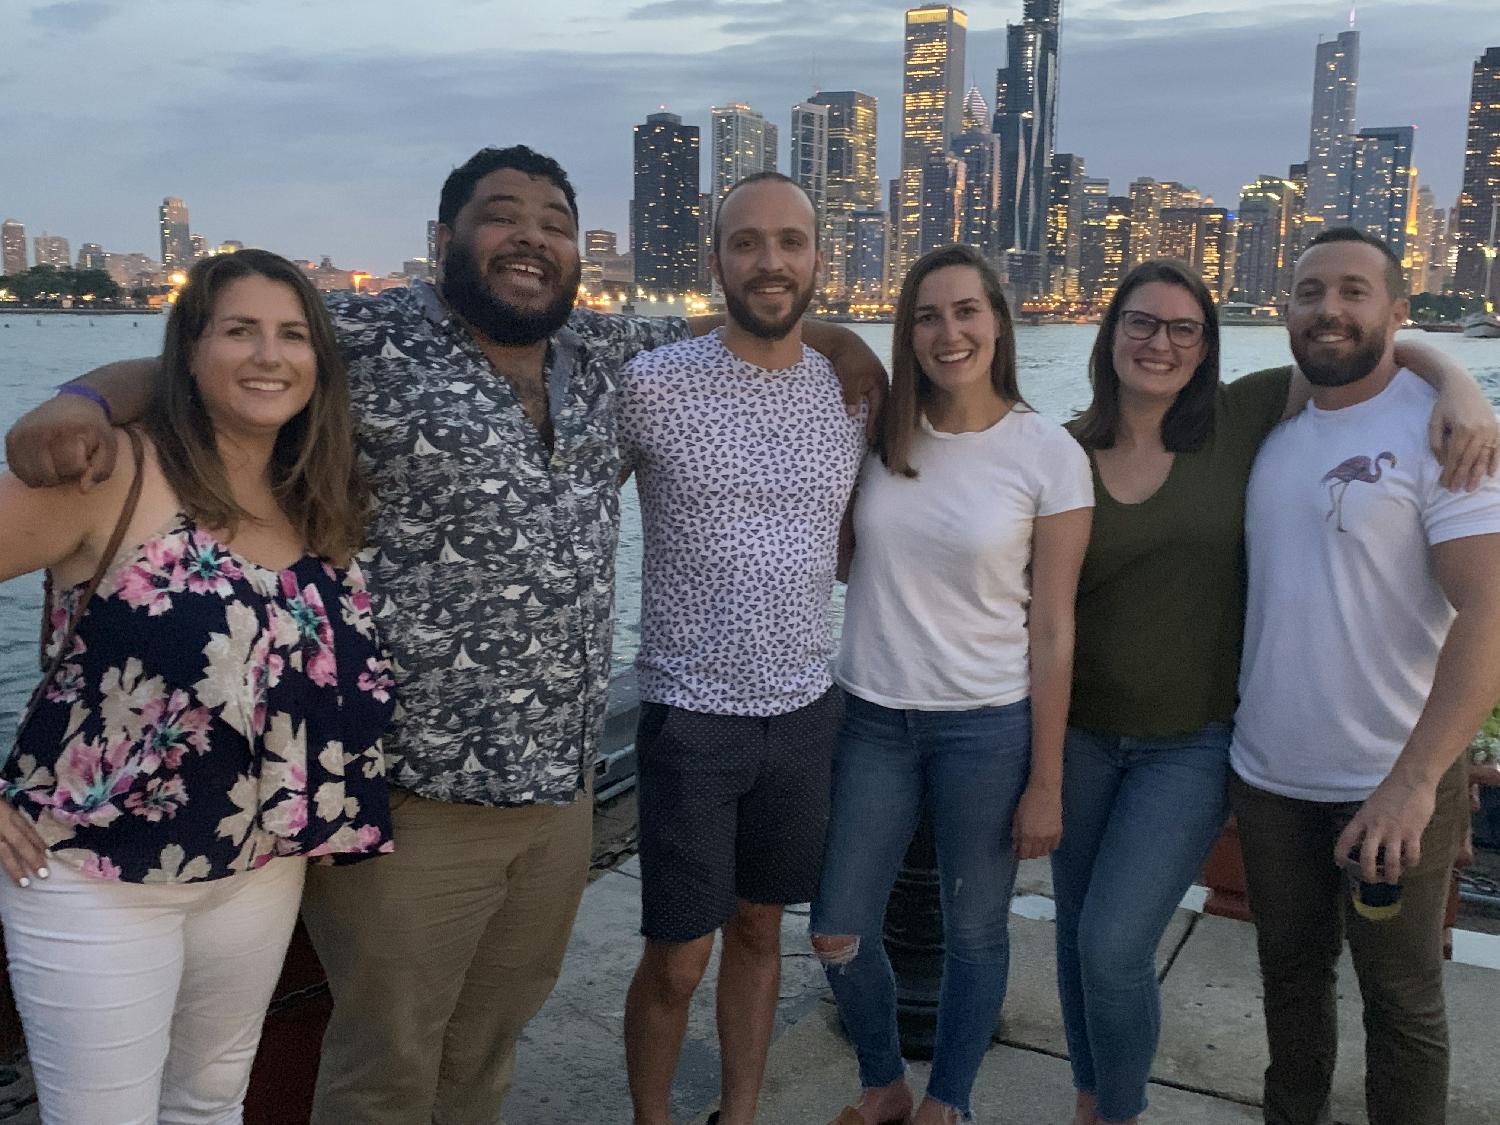 Some team members from our Chicago and San Francisco offices enjoying the summer weather at our off-site meeting in Chicago 2019.